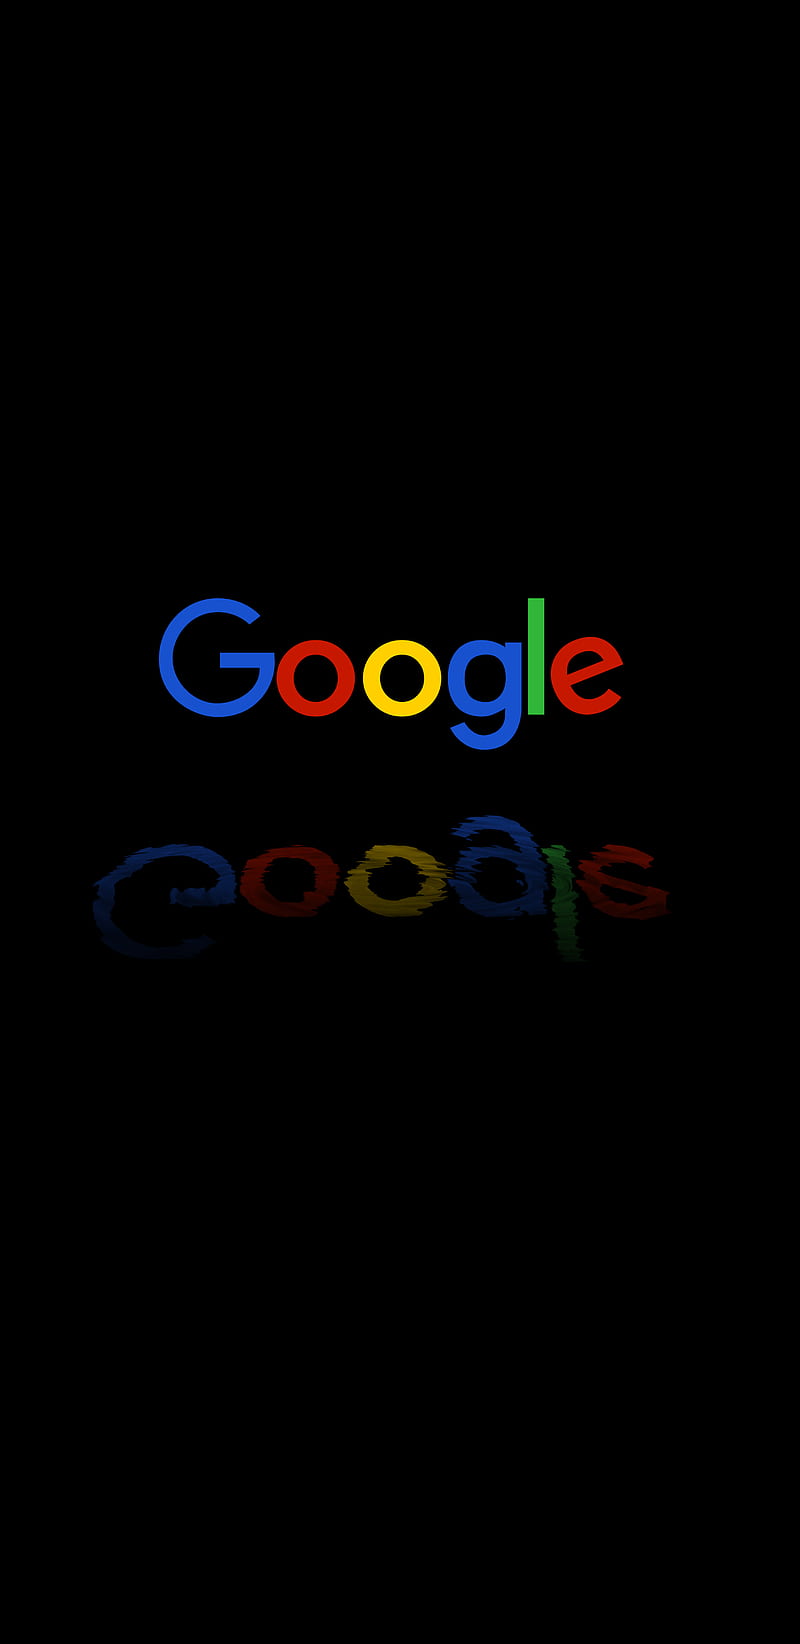 GOOGLE, 929, android, colors logo, new, pixel 2, reflection, tech, HD phone wallpaper